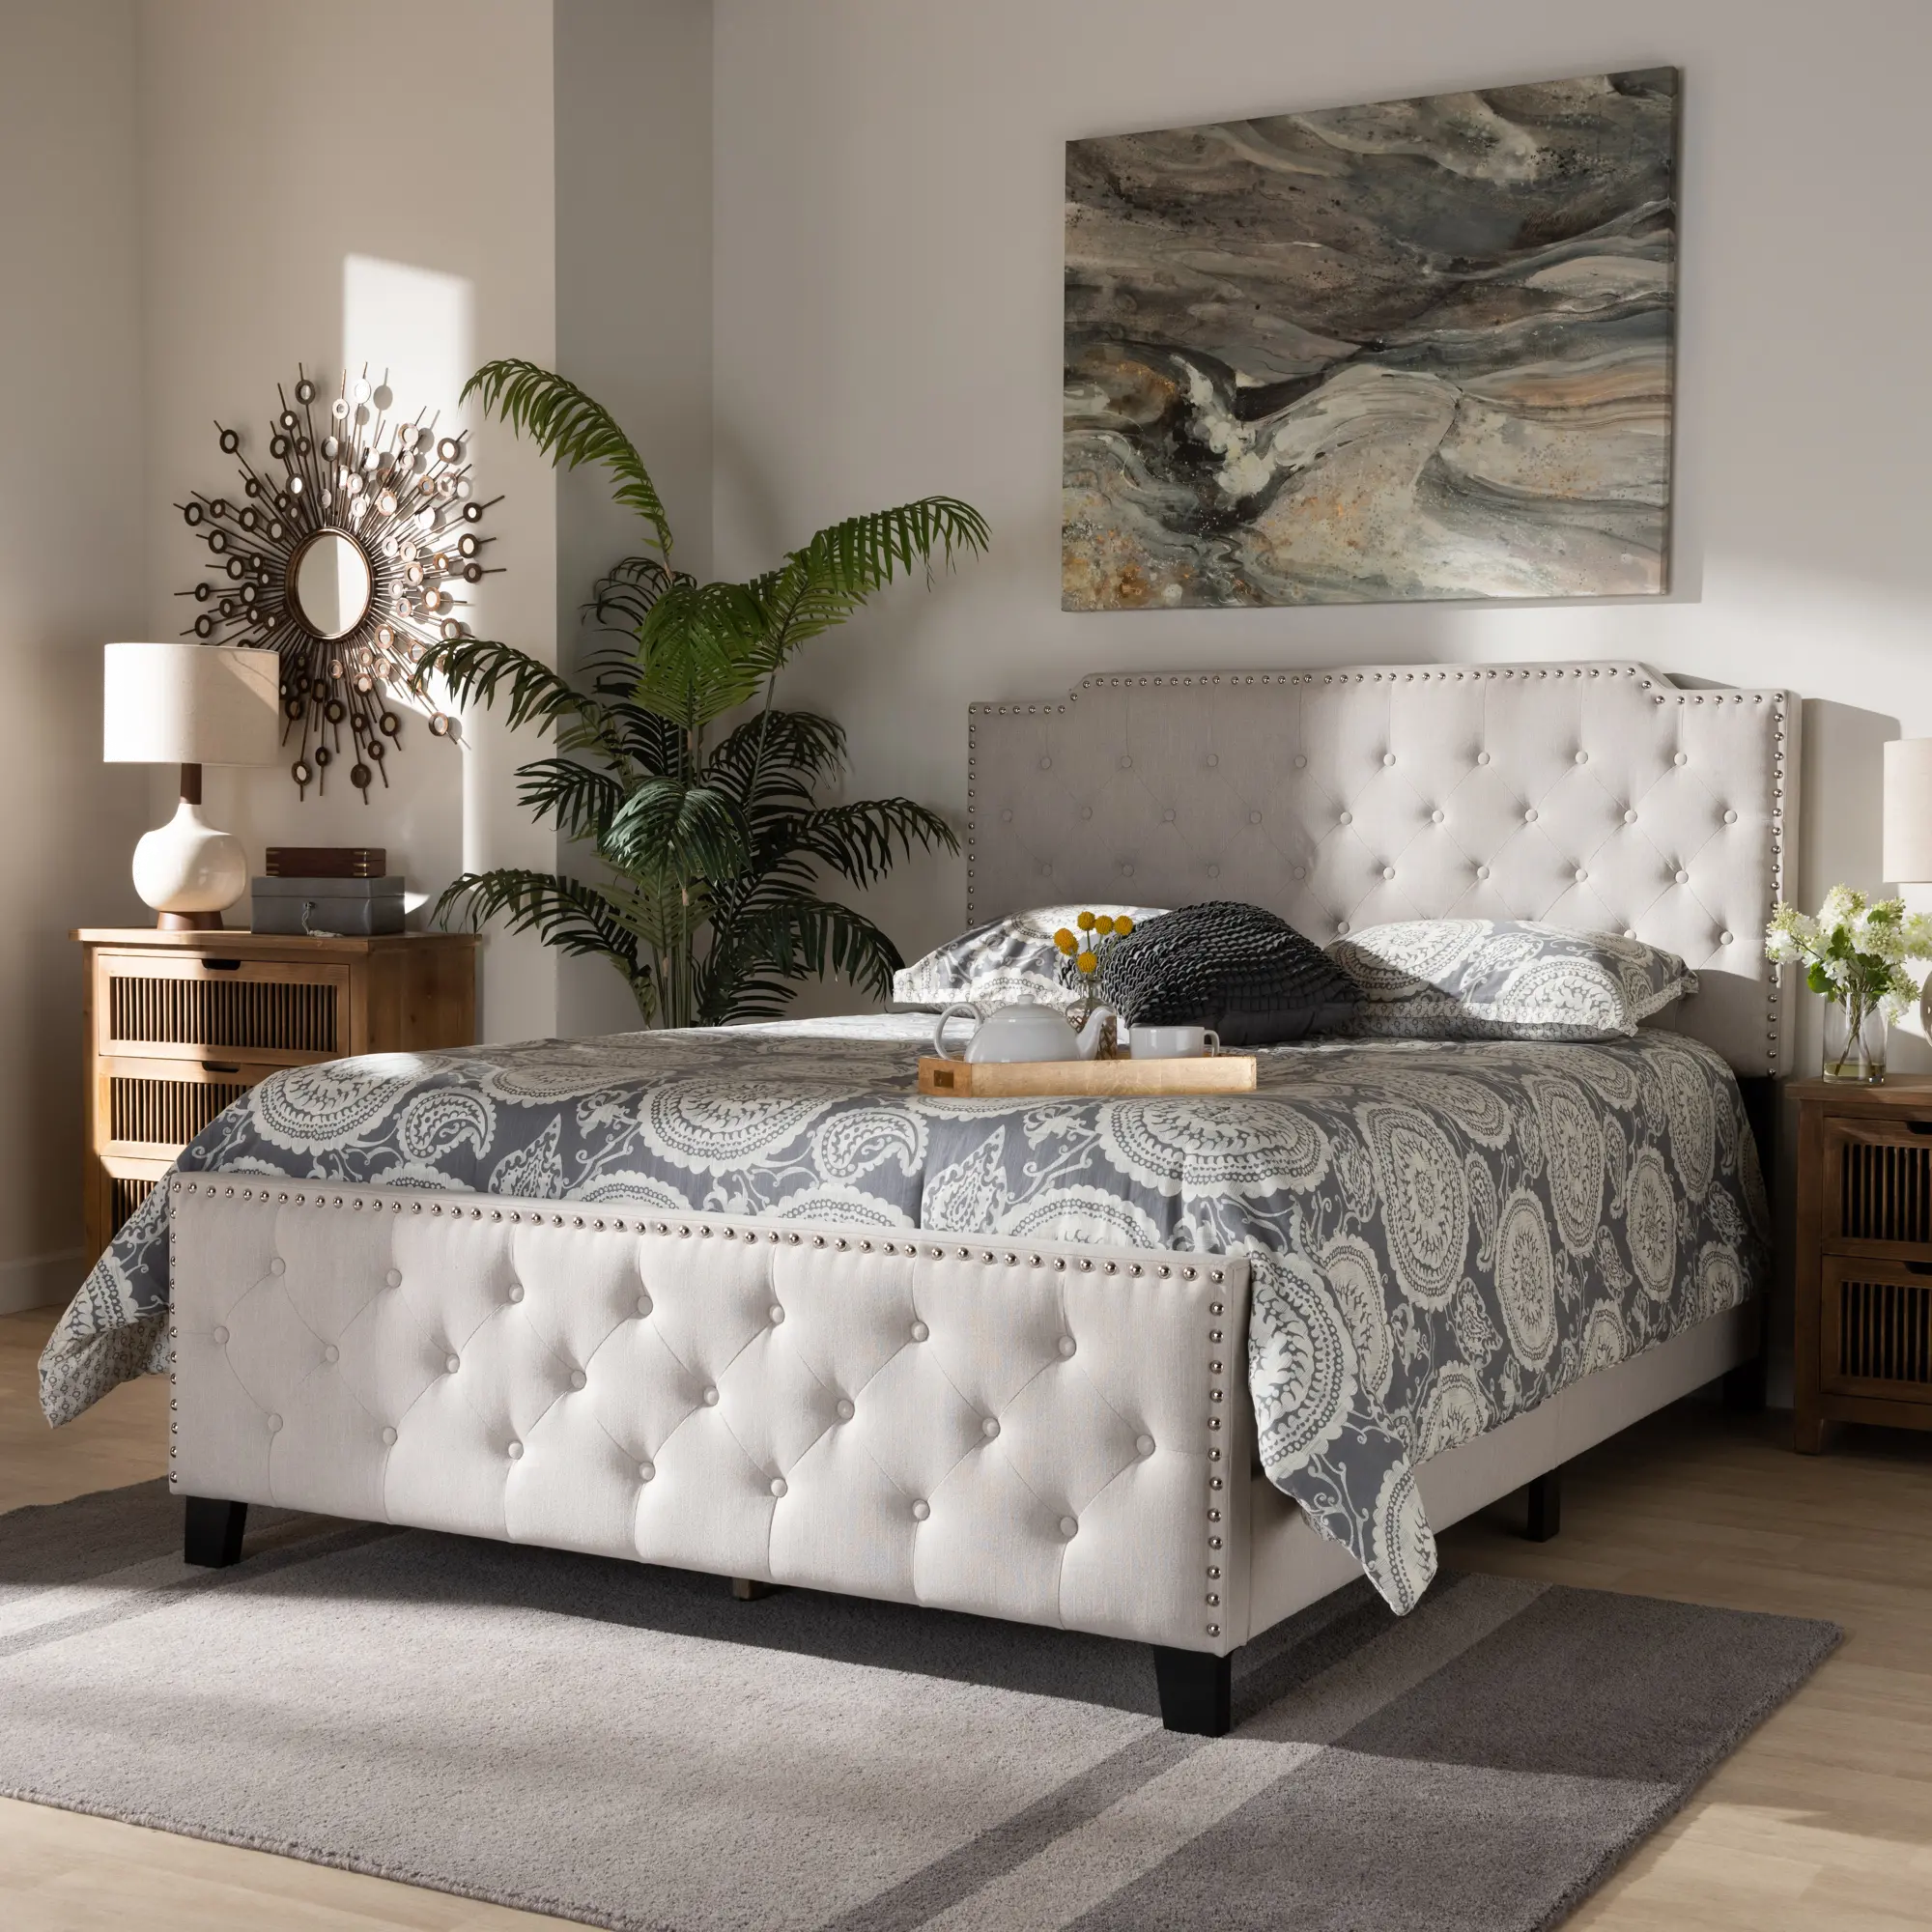 162-10325-RCW Contemporary Beige King Upholstered Bed - Katey sku 162-10325-RCW